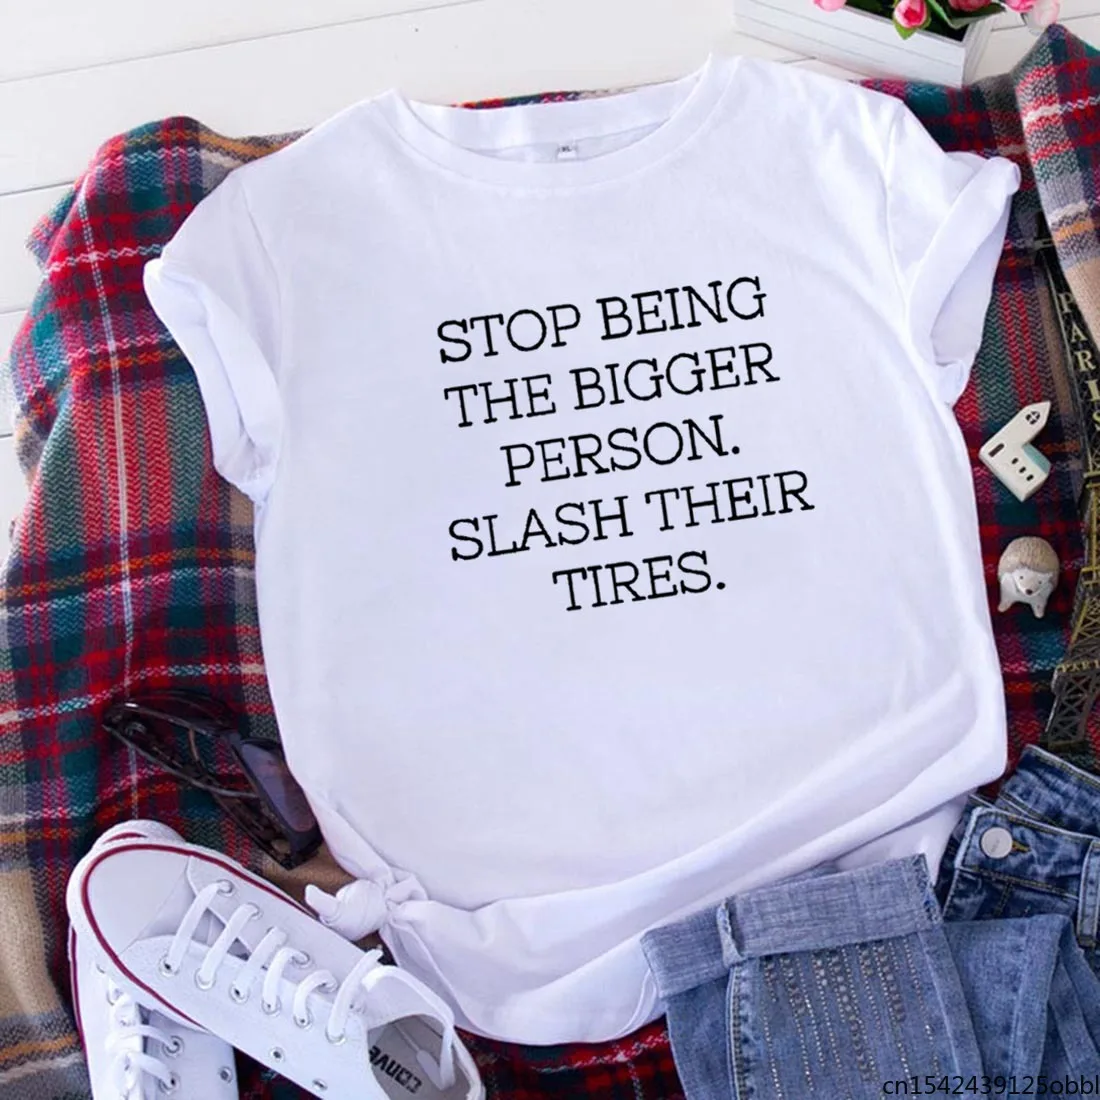 

Stop Being Bigger Person Funny T Shirt Women Summer Short Sleeve O-neck White Femme